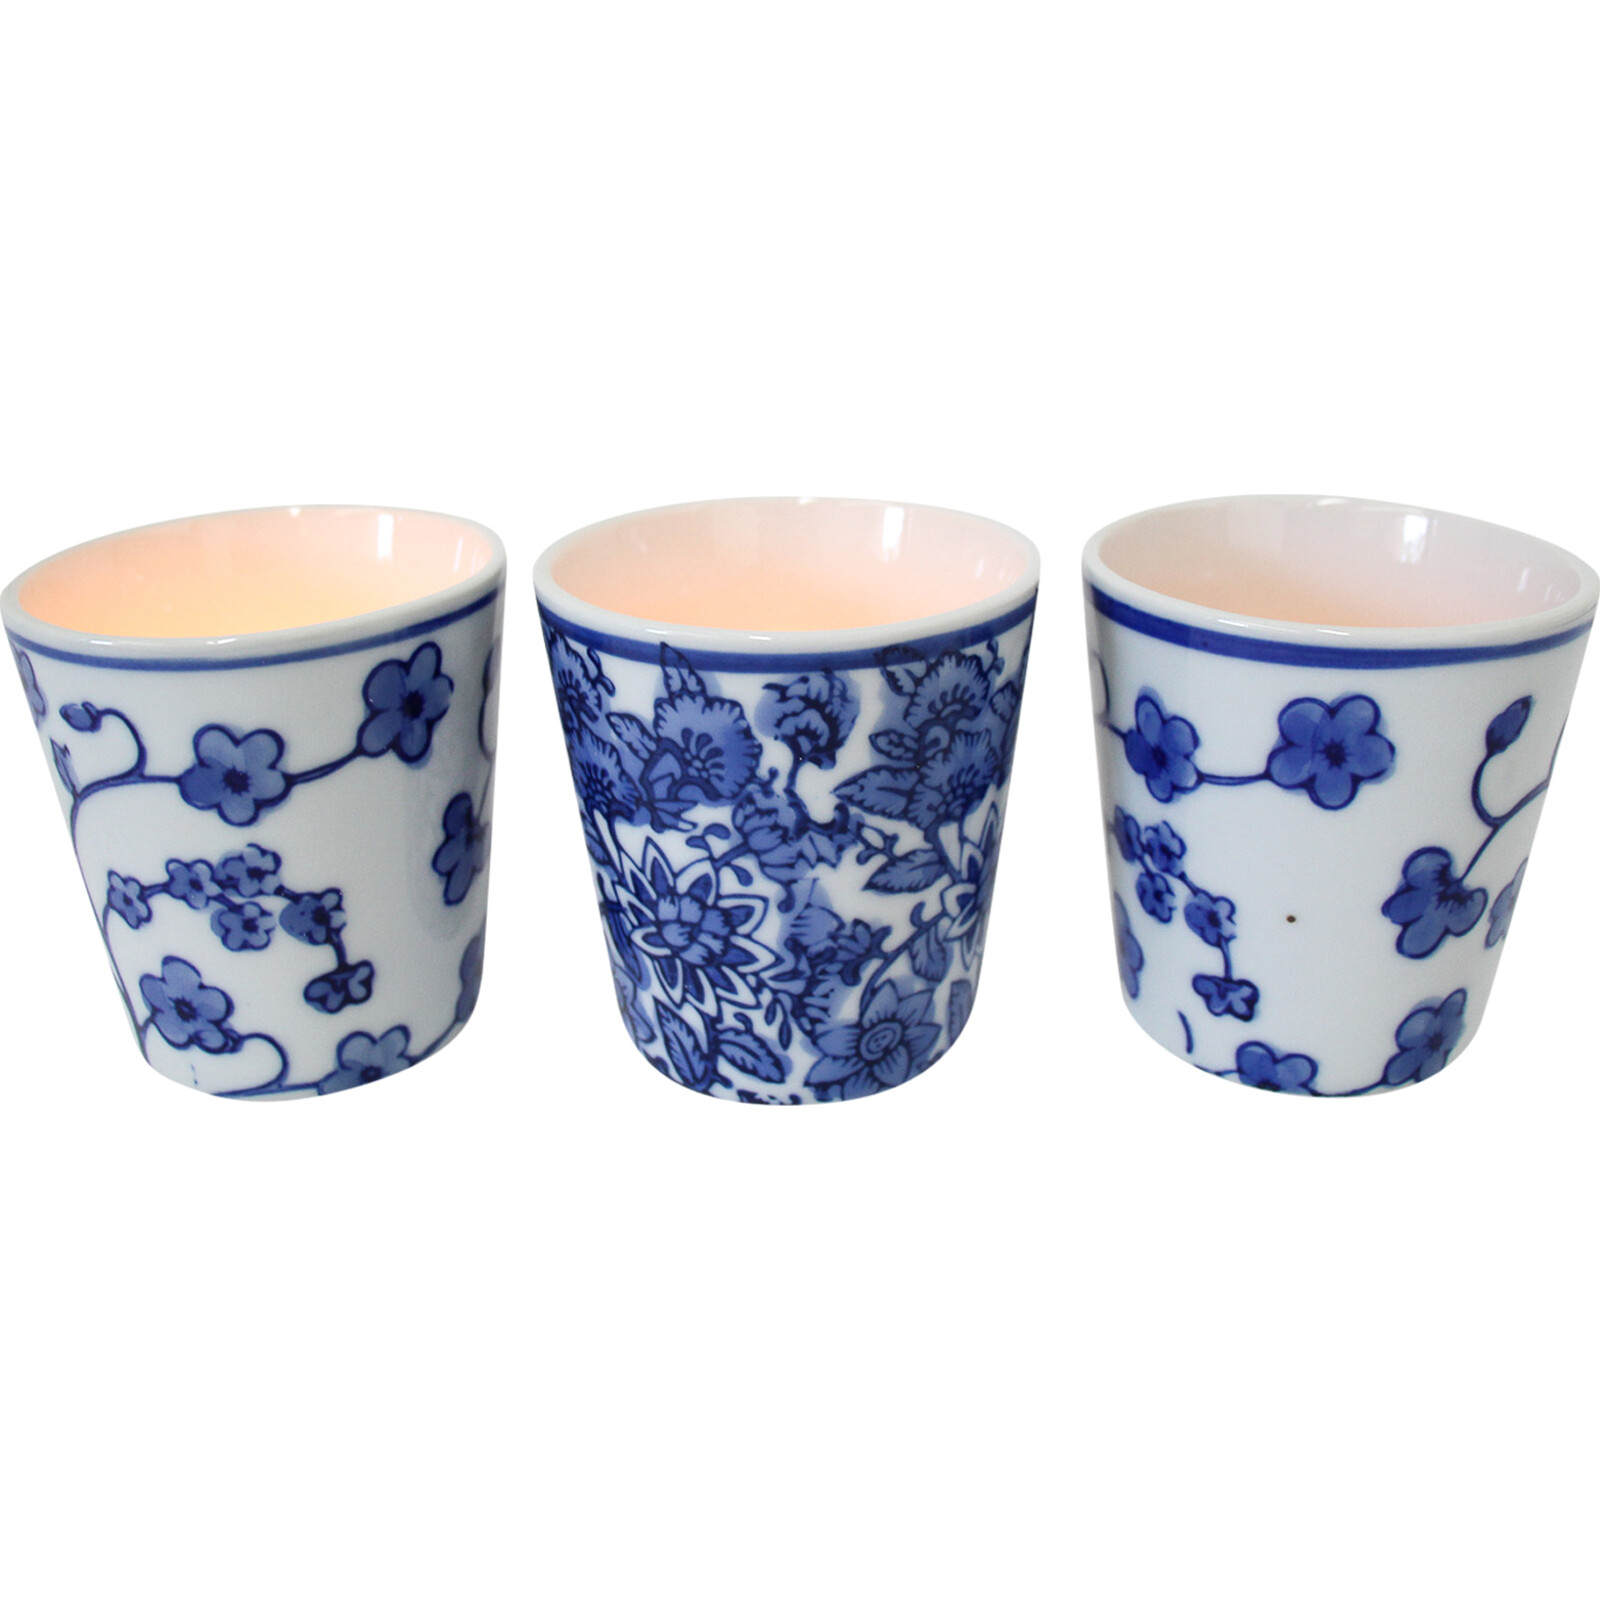 Tealight Holder S/3 Blue and White Mix